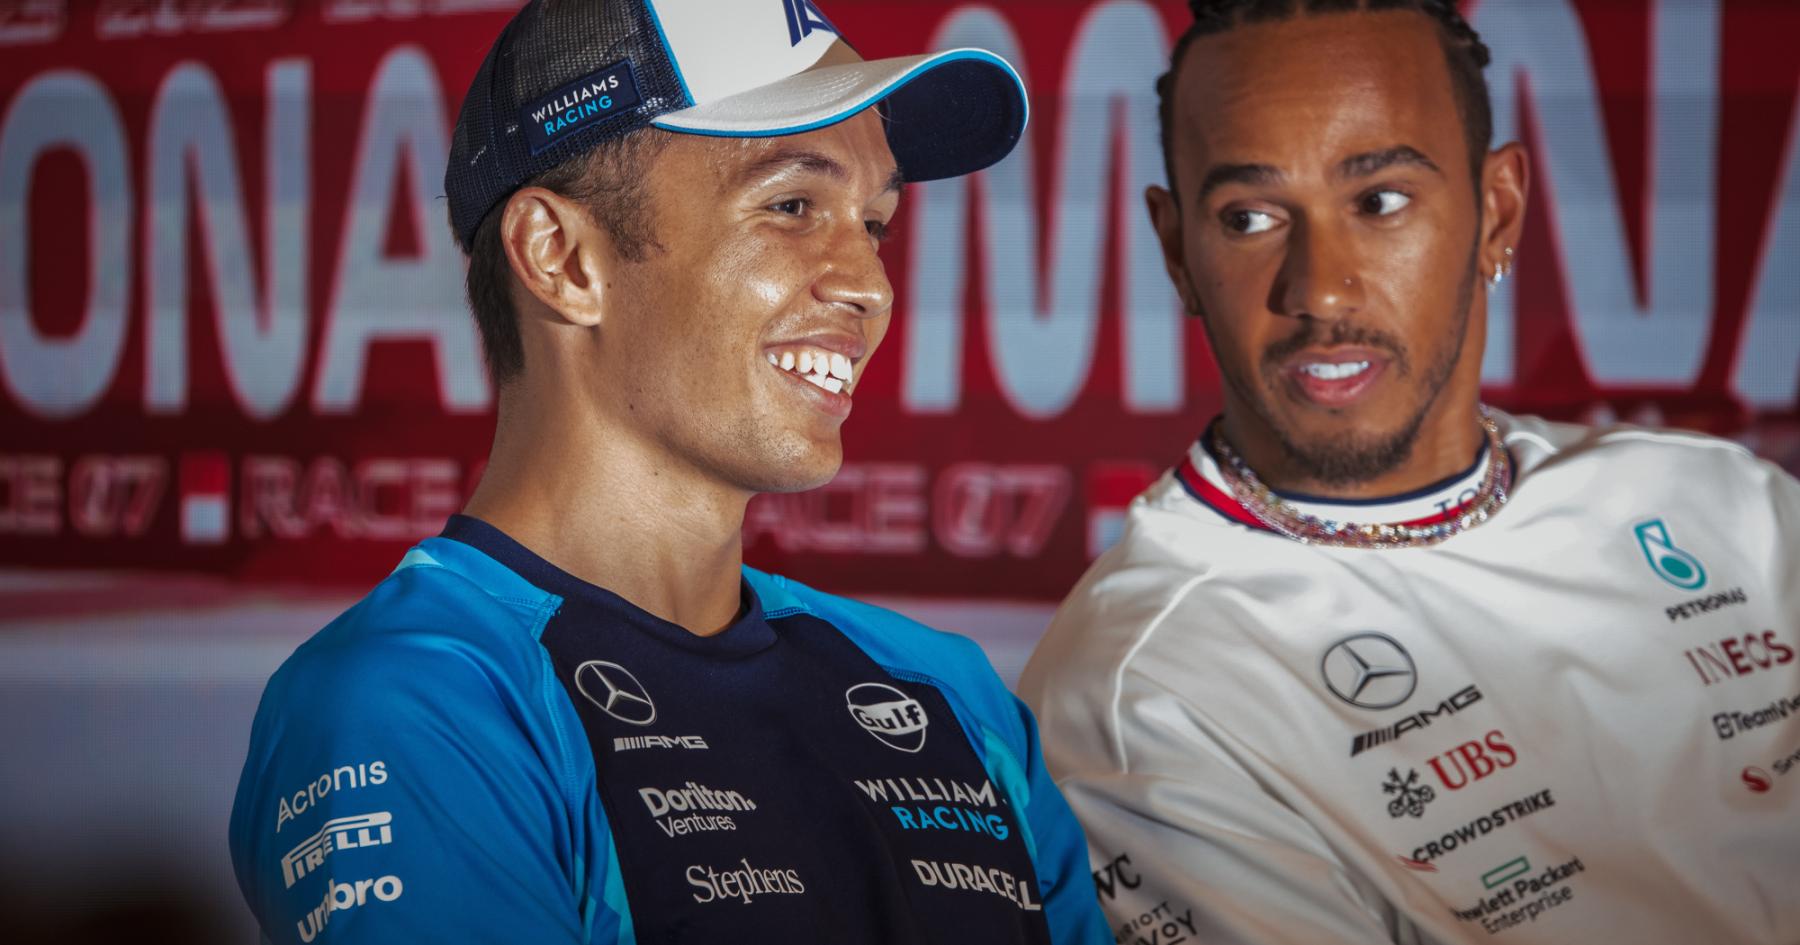 Hamilton could have become a Williams F1 driver